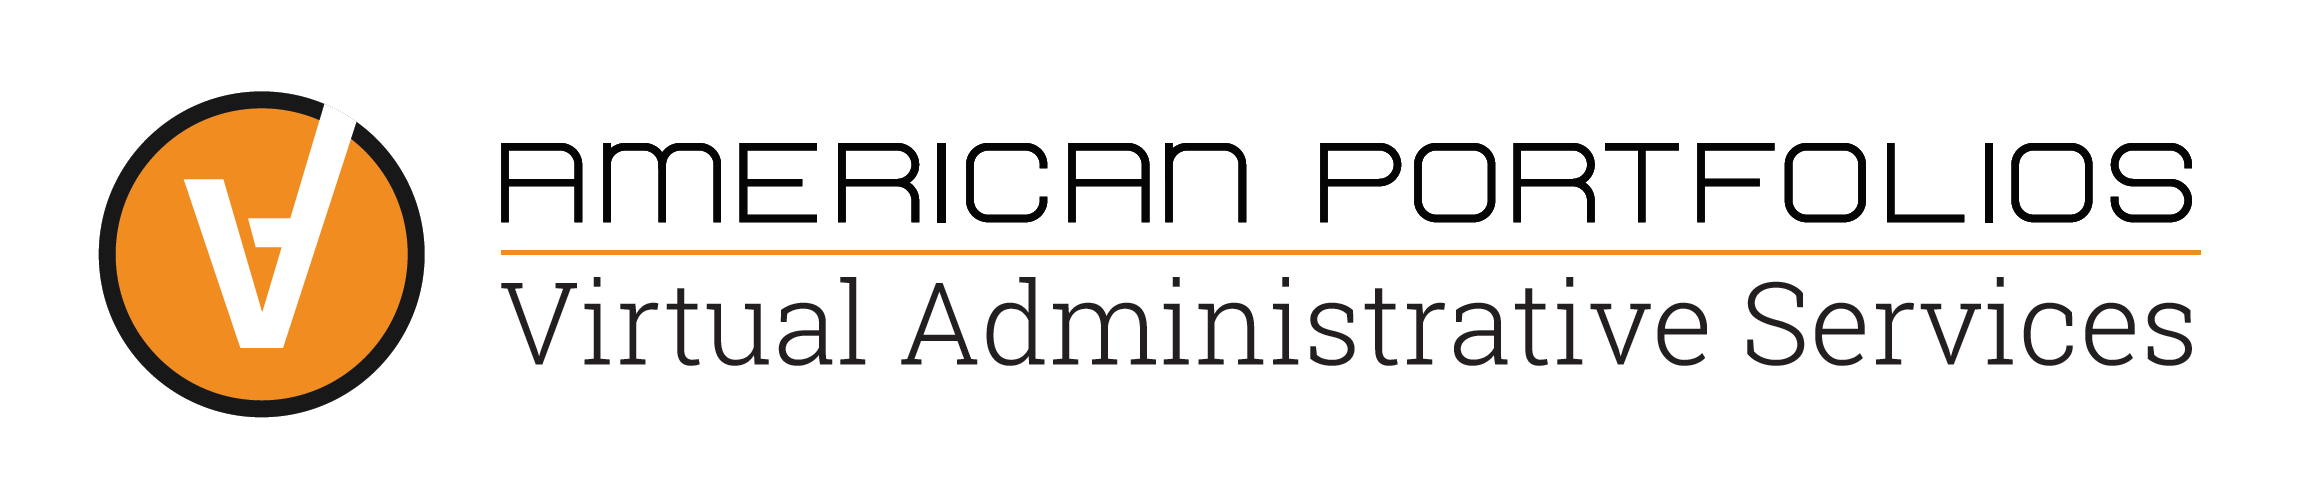 American Portfolios Financial Services, Inc., Tuesday, September 29, 2020, Press release picture